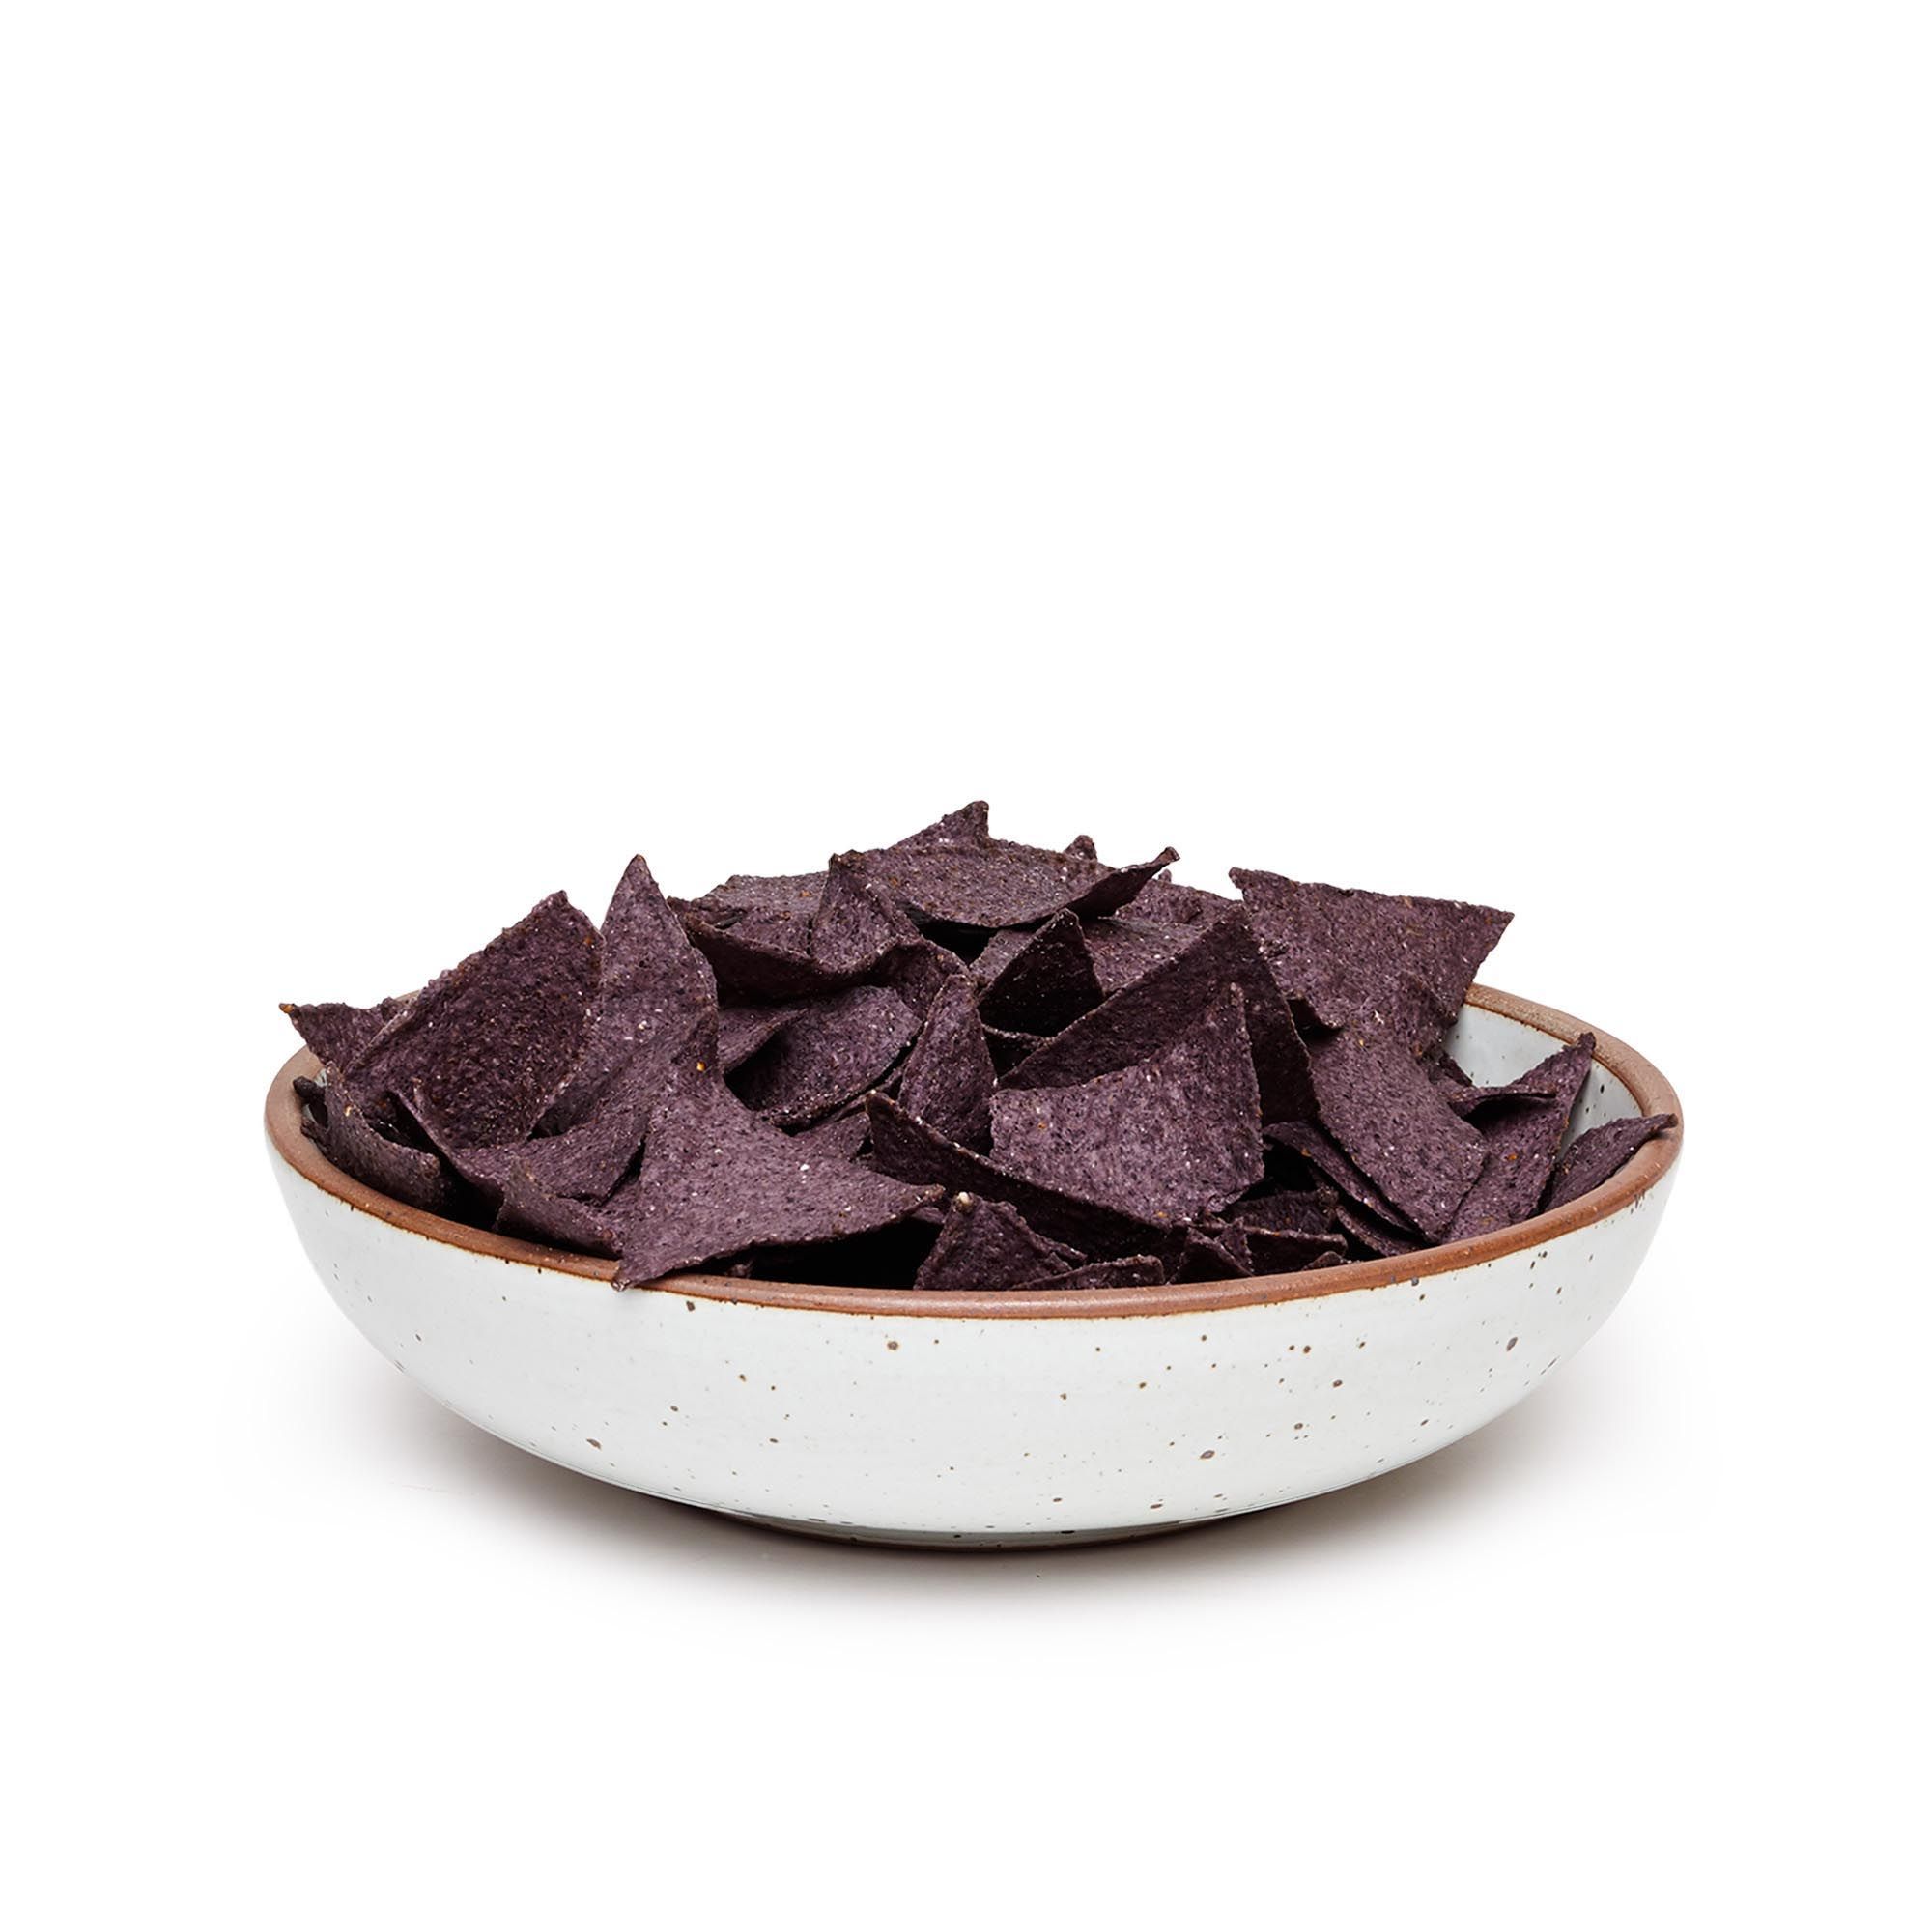 A large shallow serving ceramic bowl in a cool white color featuring iron speckles and an unglazed rim, filled with tortilla chips